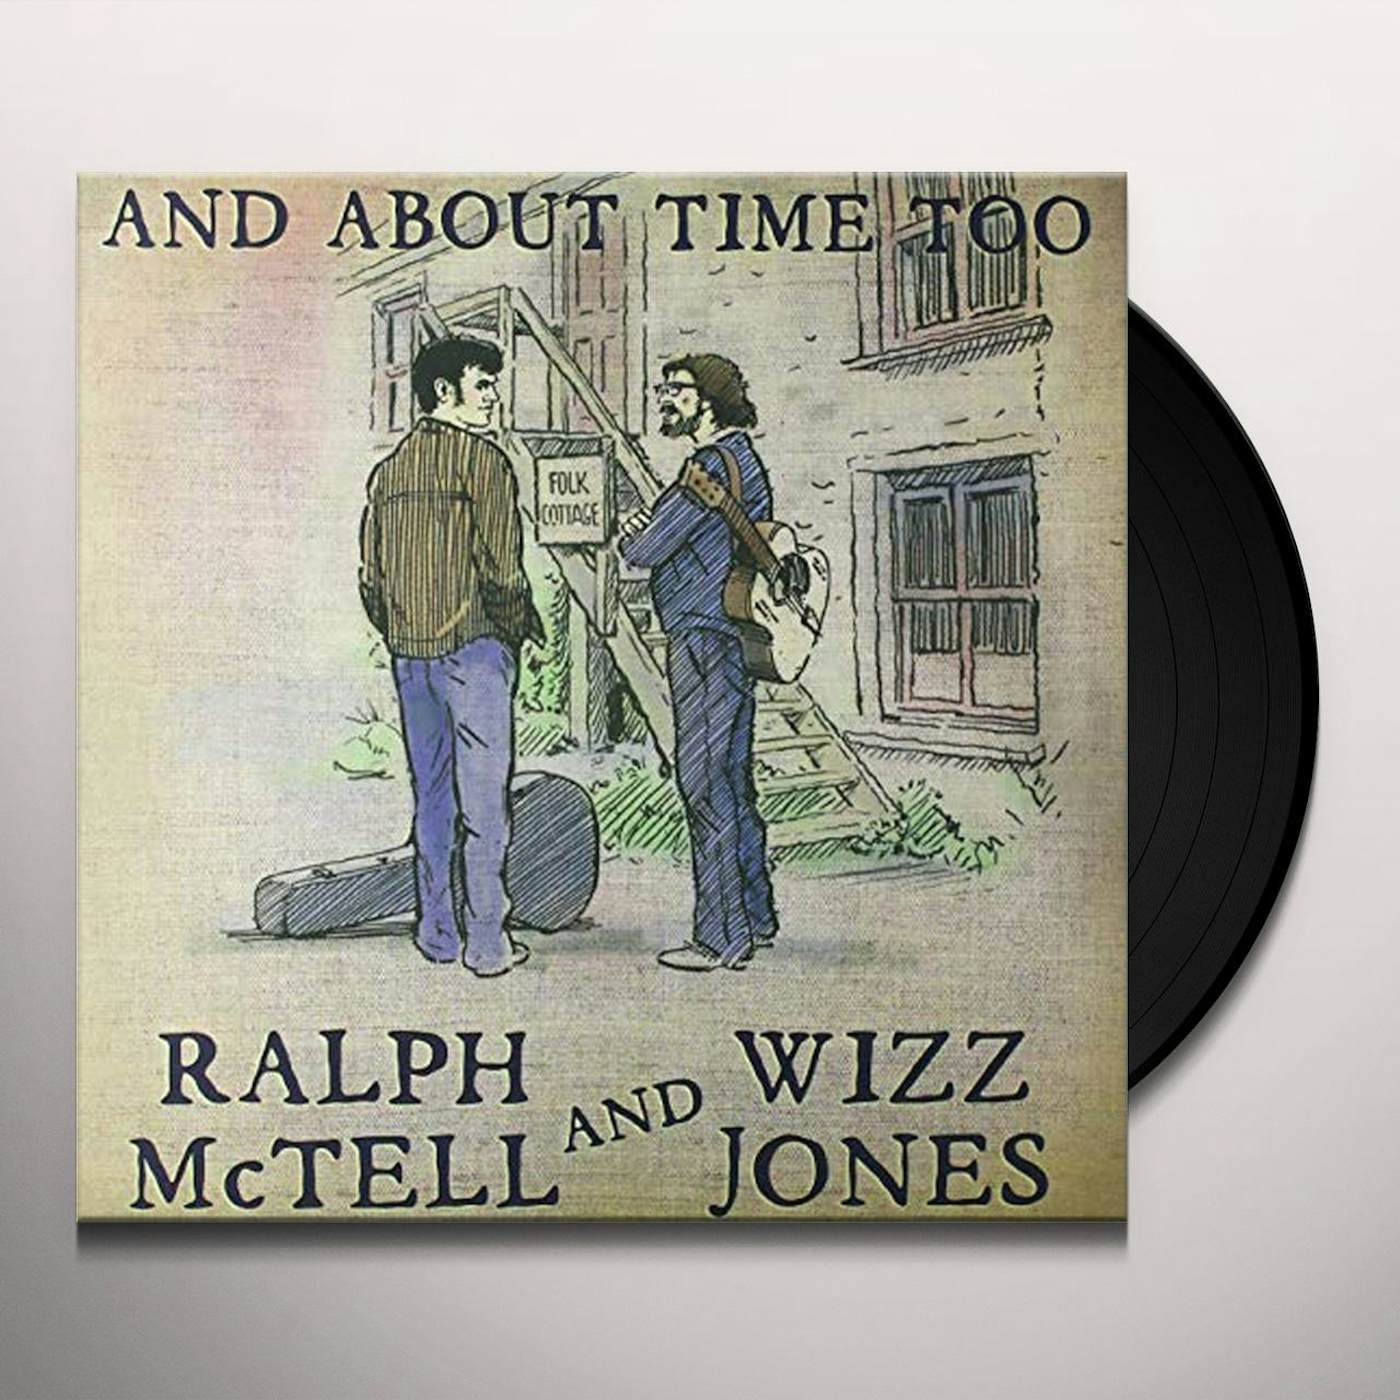 Ralph Mctell & Wizz Jones & ABOUT TIME TOO Vinyl Record